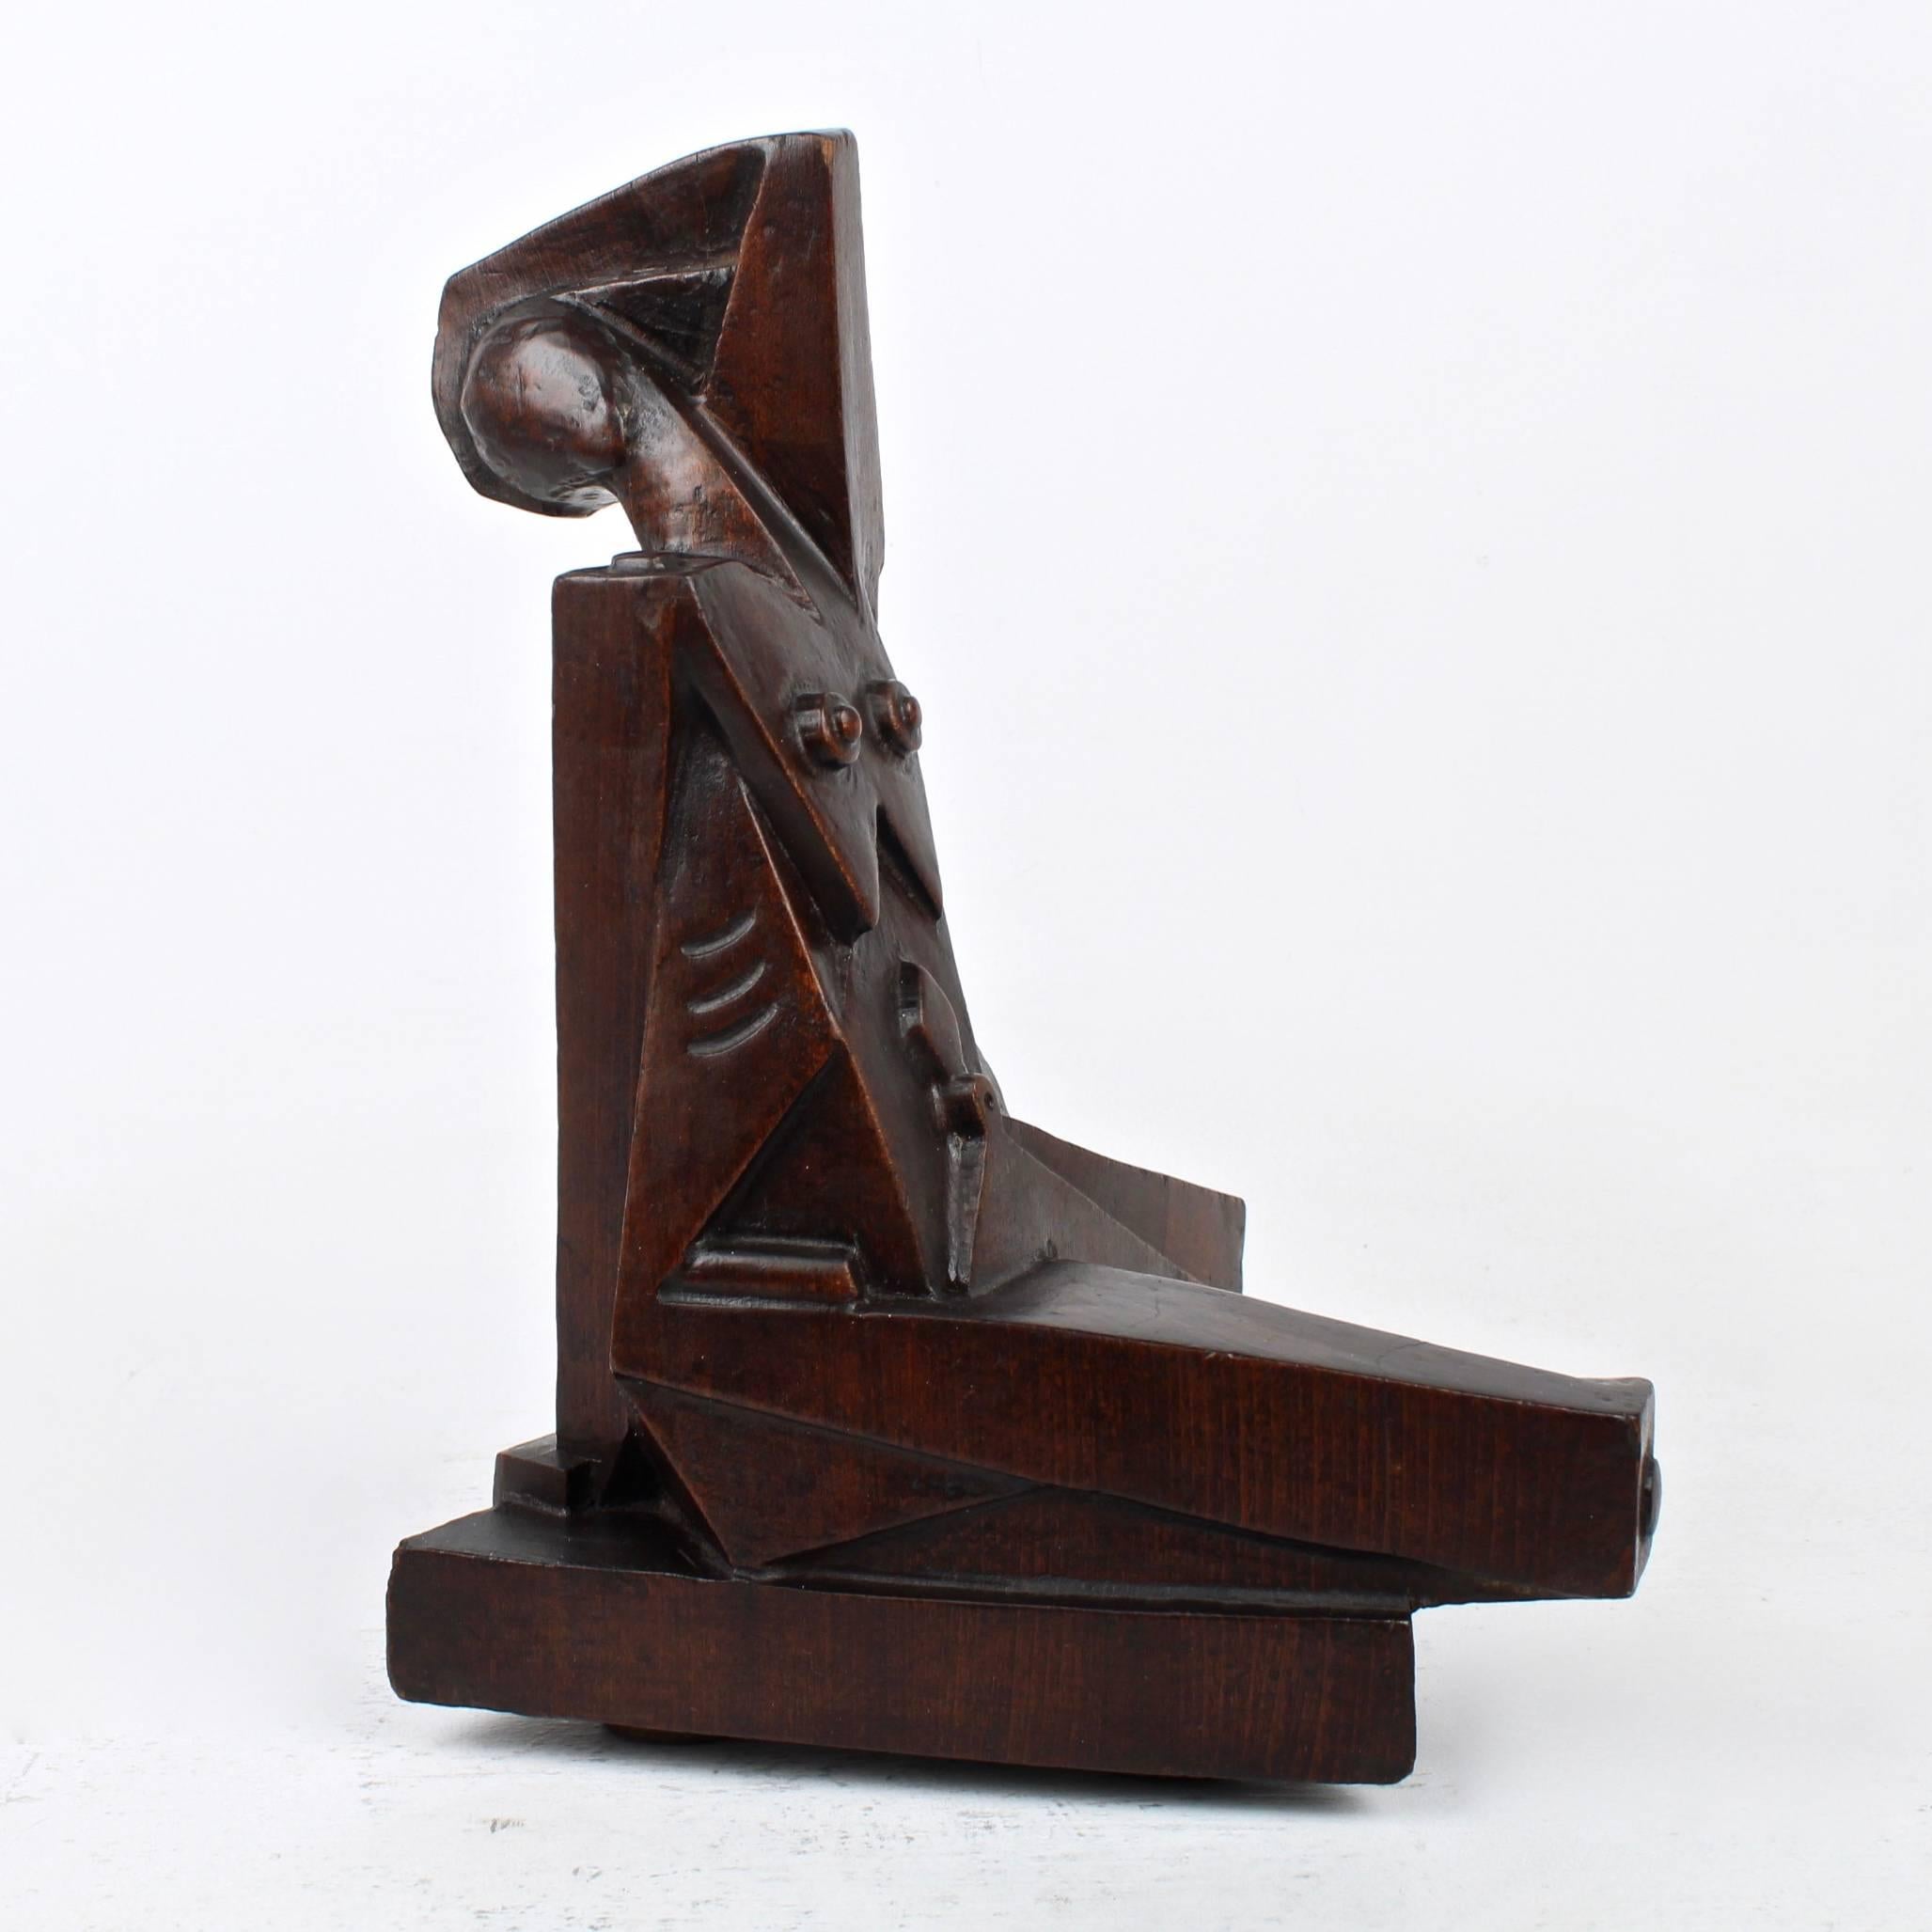 Stained Cubist Wood Sculpture of a Nude by Russian American Sculptor Boris Blai, 1930s For Sale